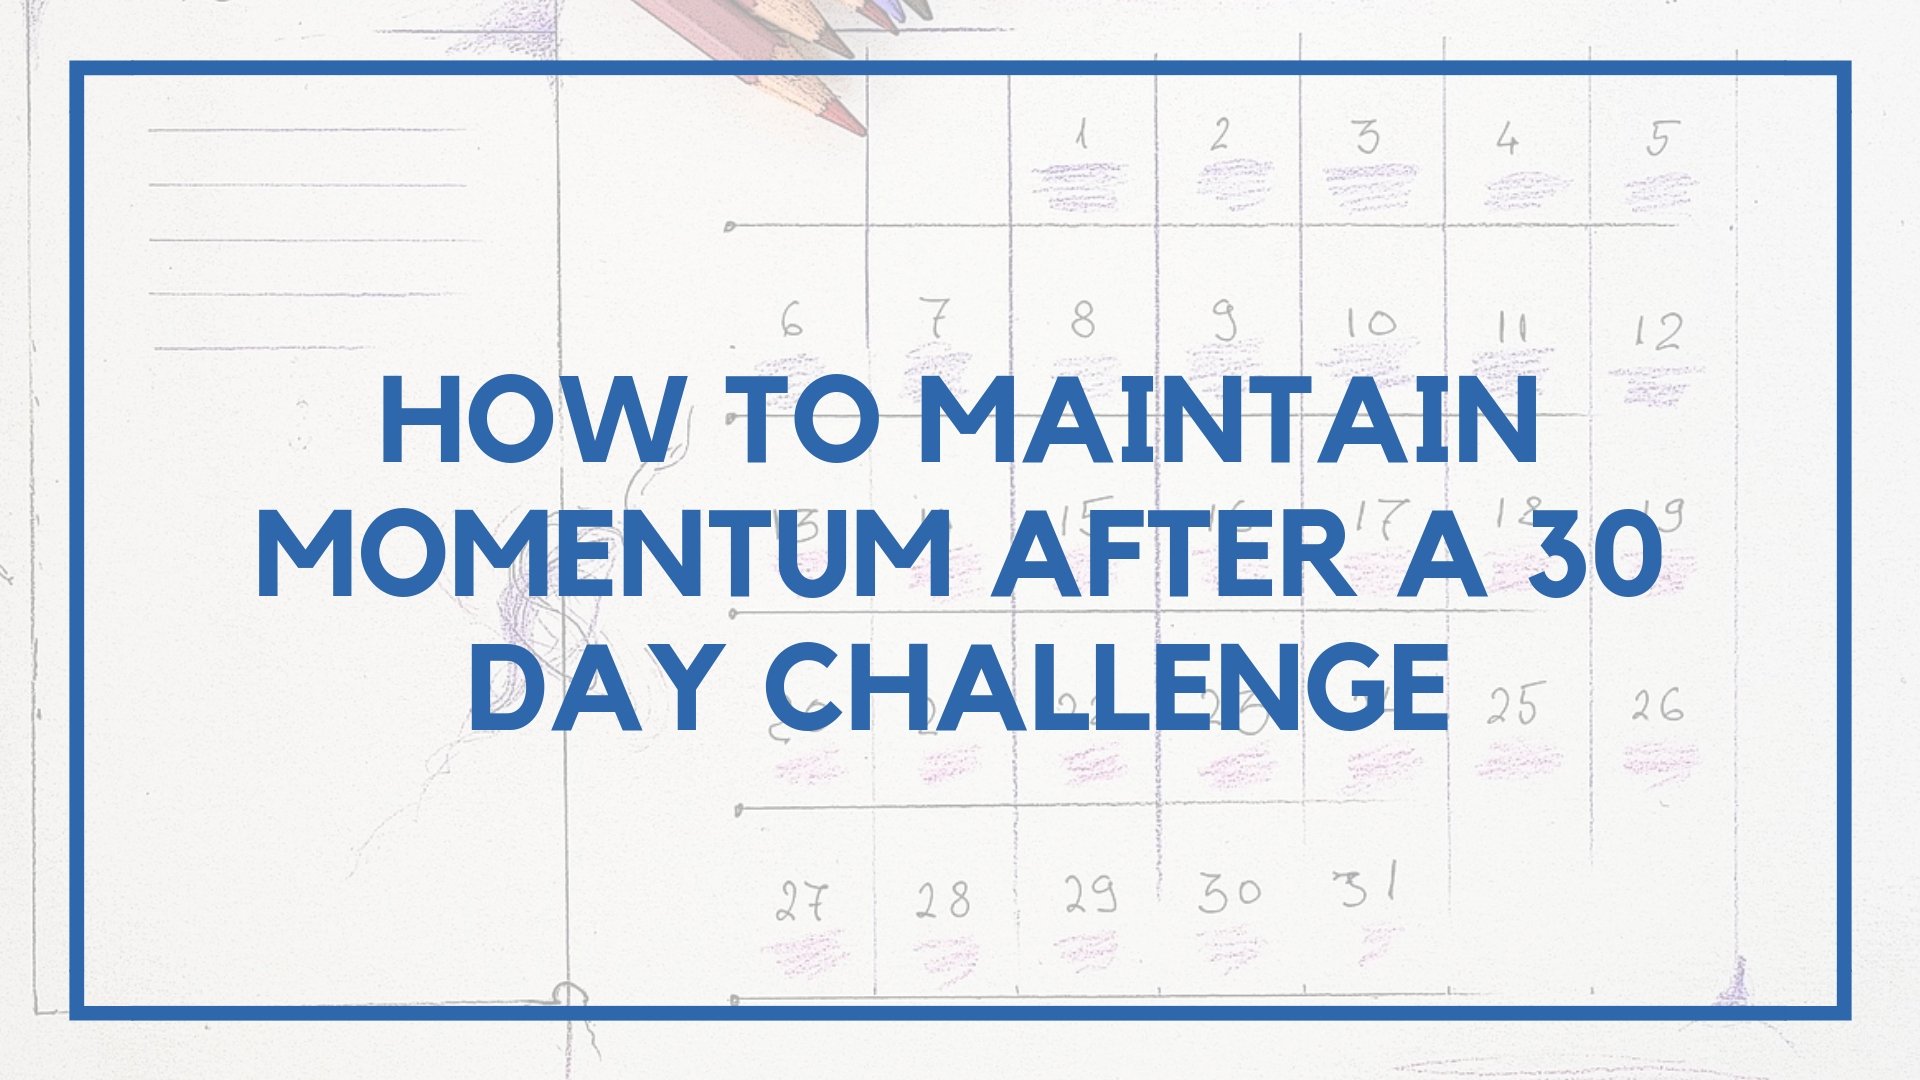 How to Maintain Momentum After a 30 Day Challenge